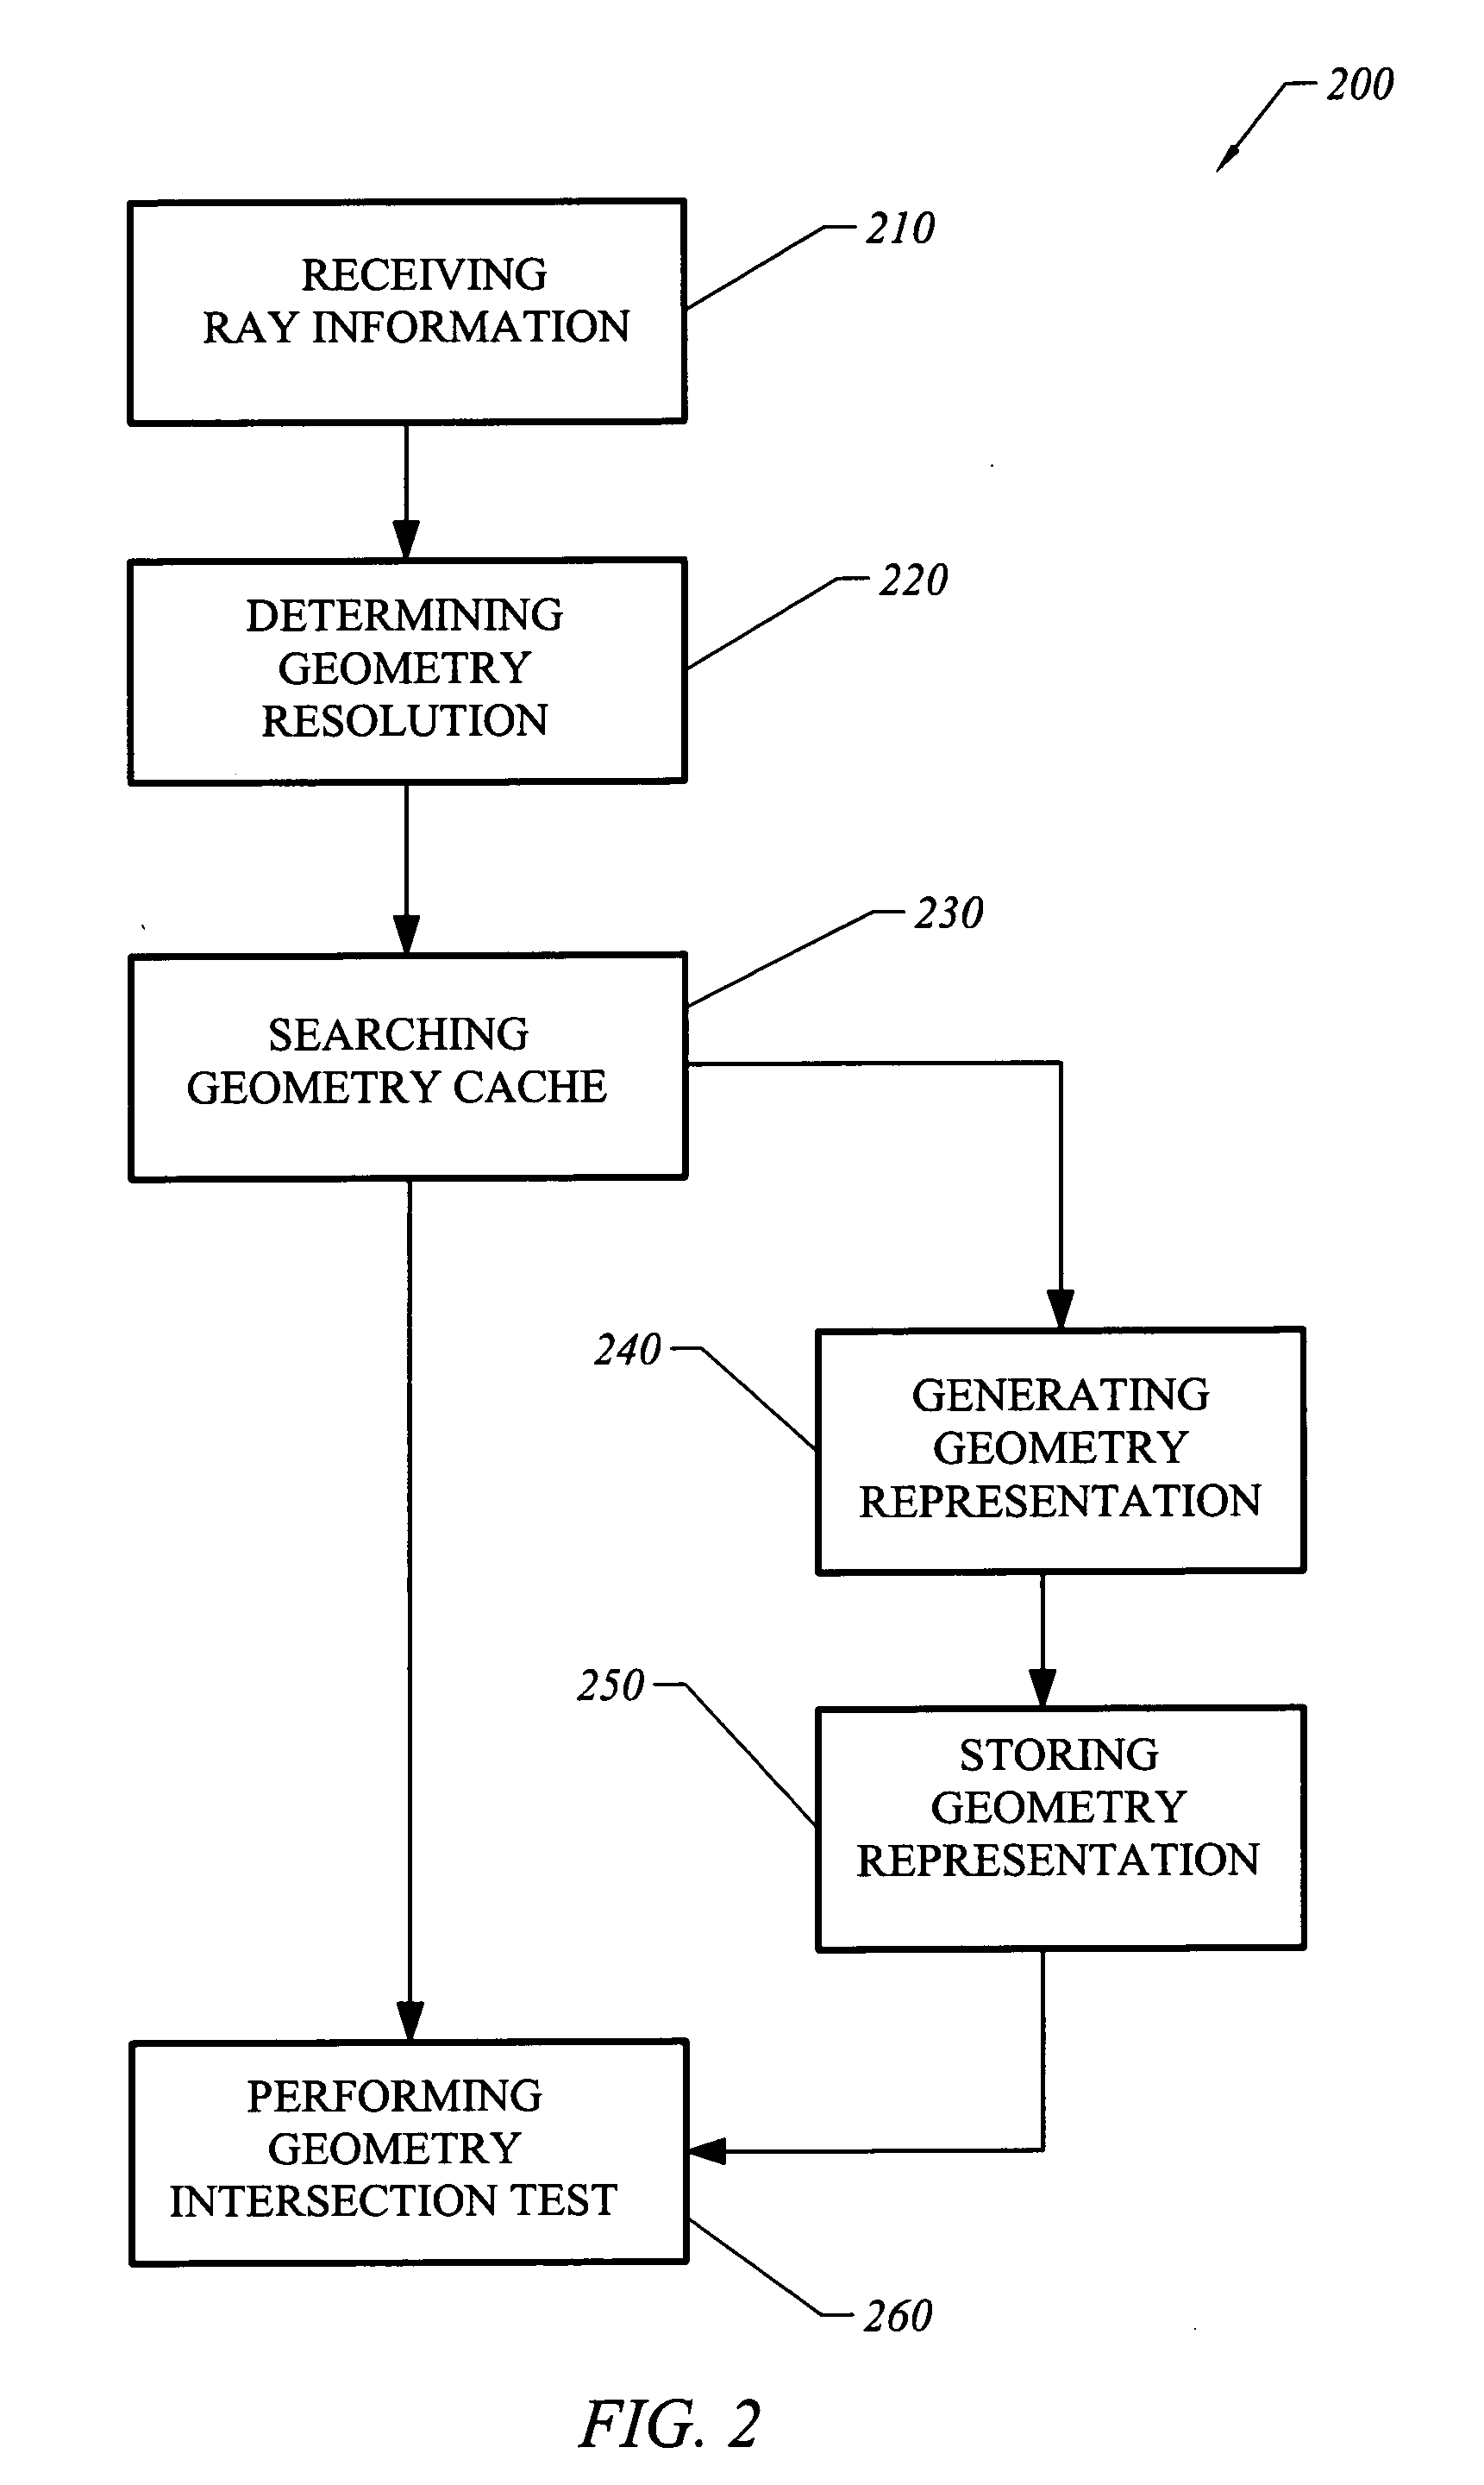 Multiresolution geometry caching based on ray differentials with stitching